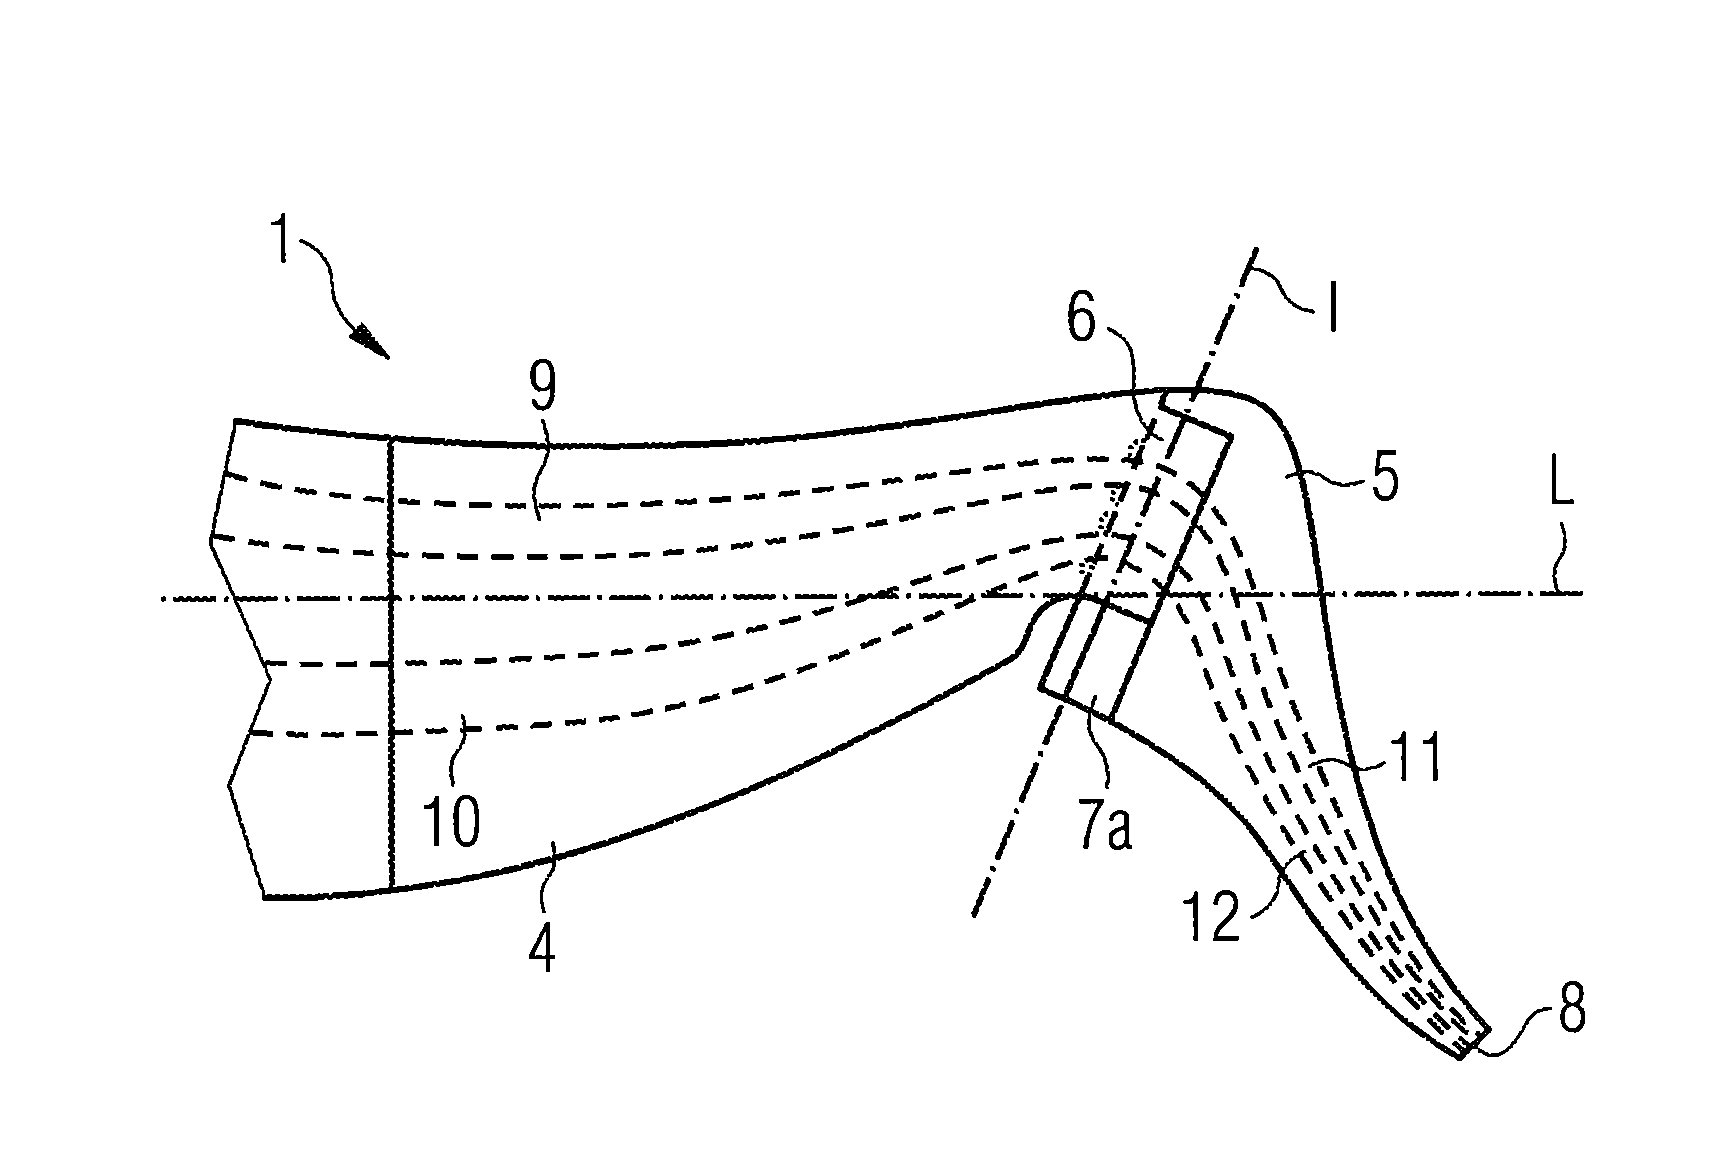 Medical handset and exchangeable nozzle for the same